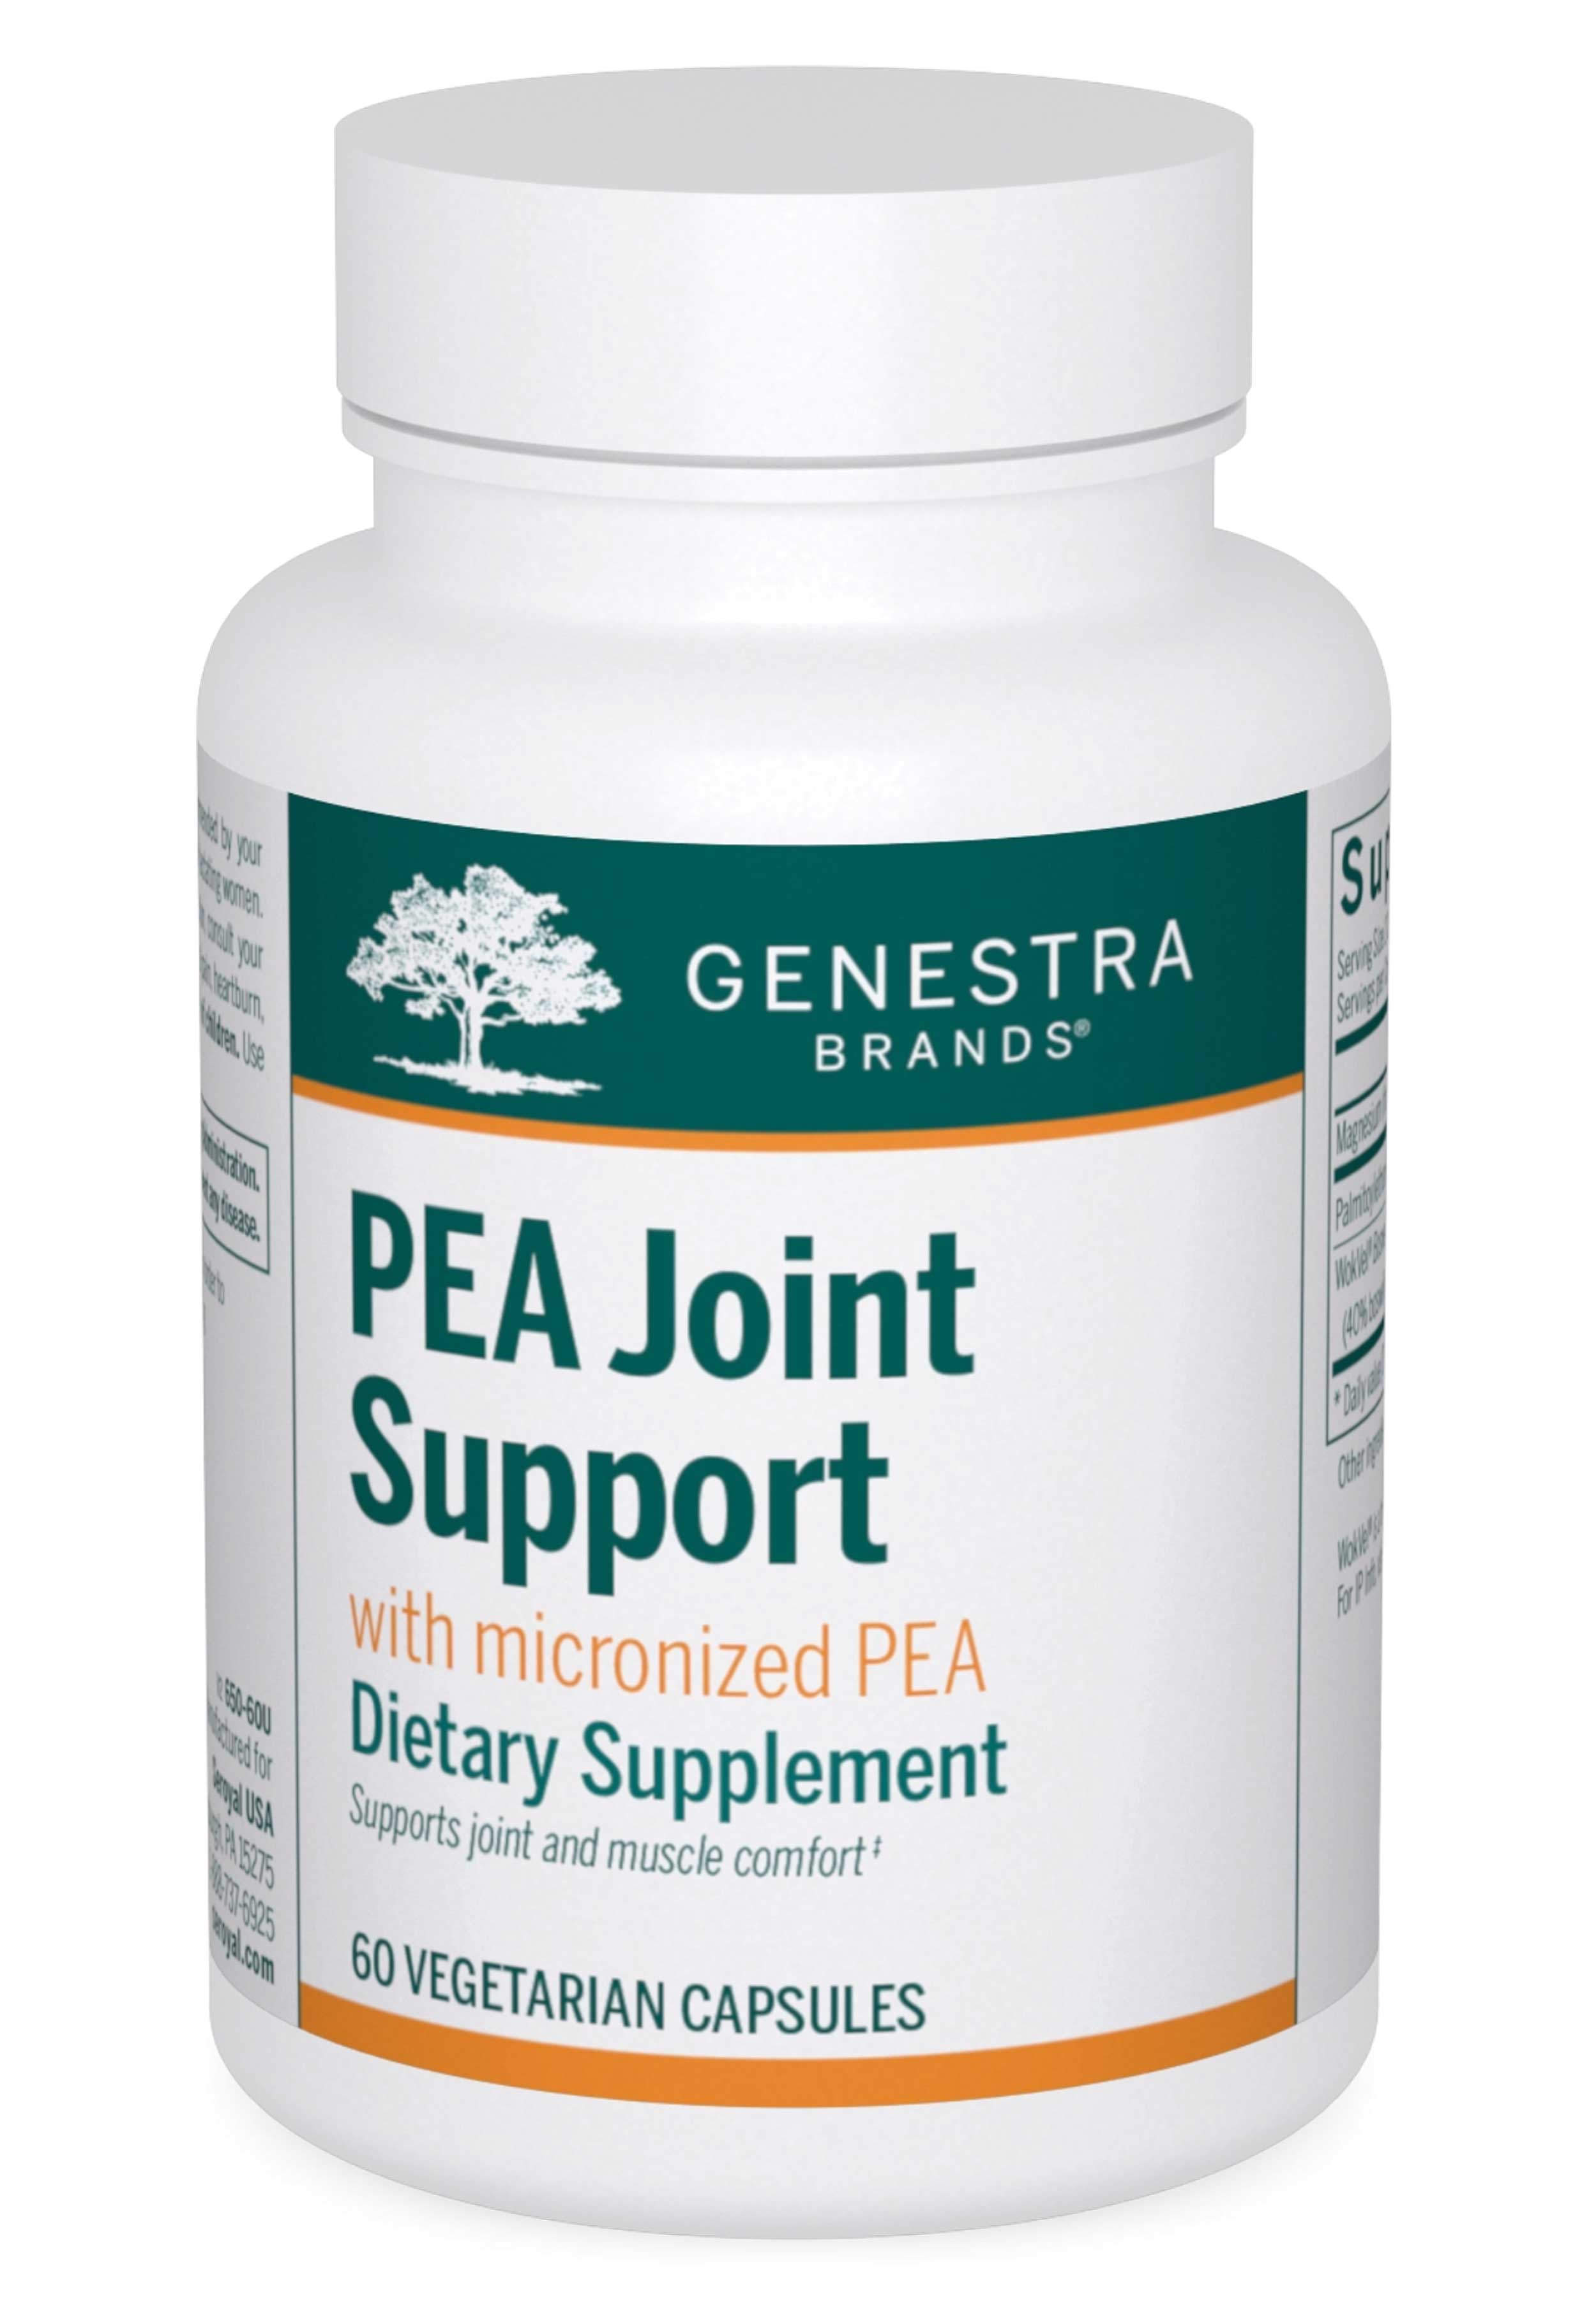 Genestra Brands PEA Joint Support